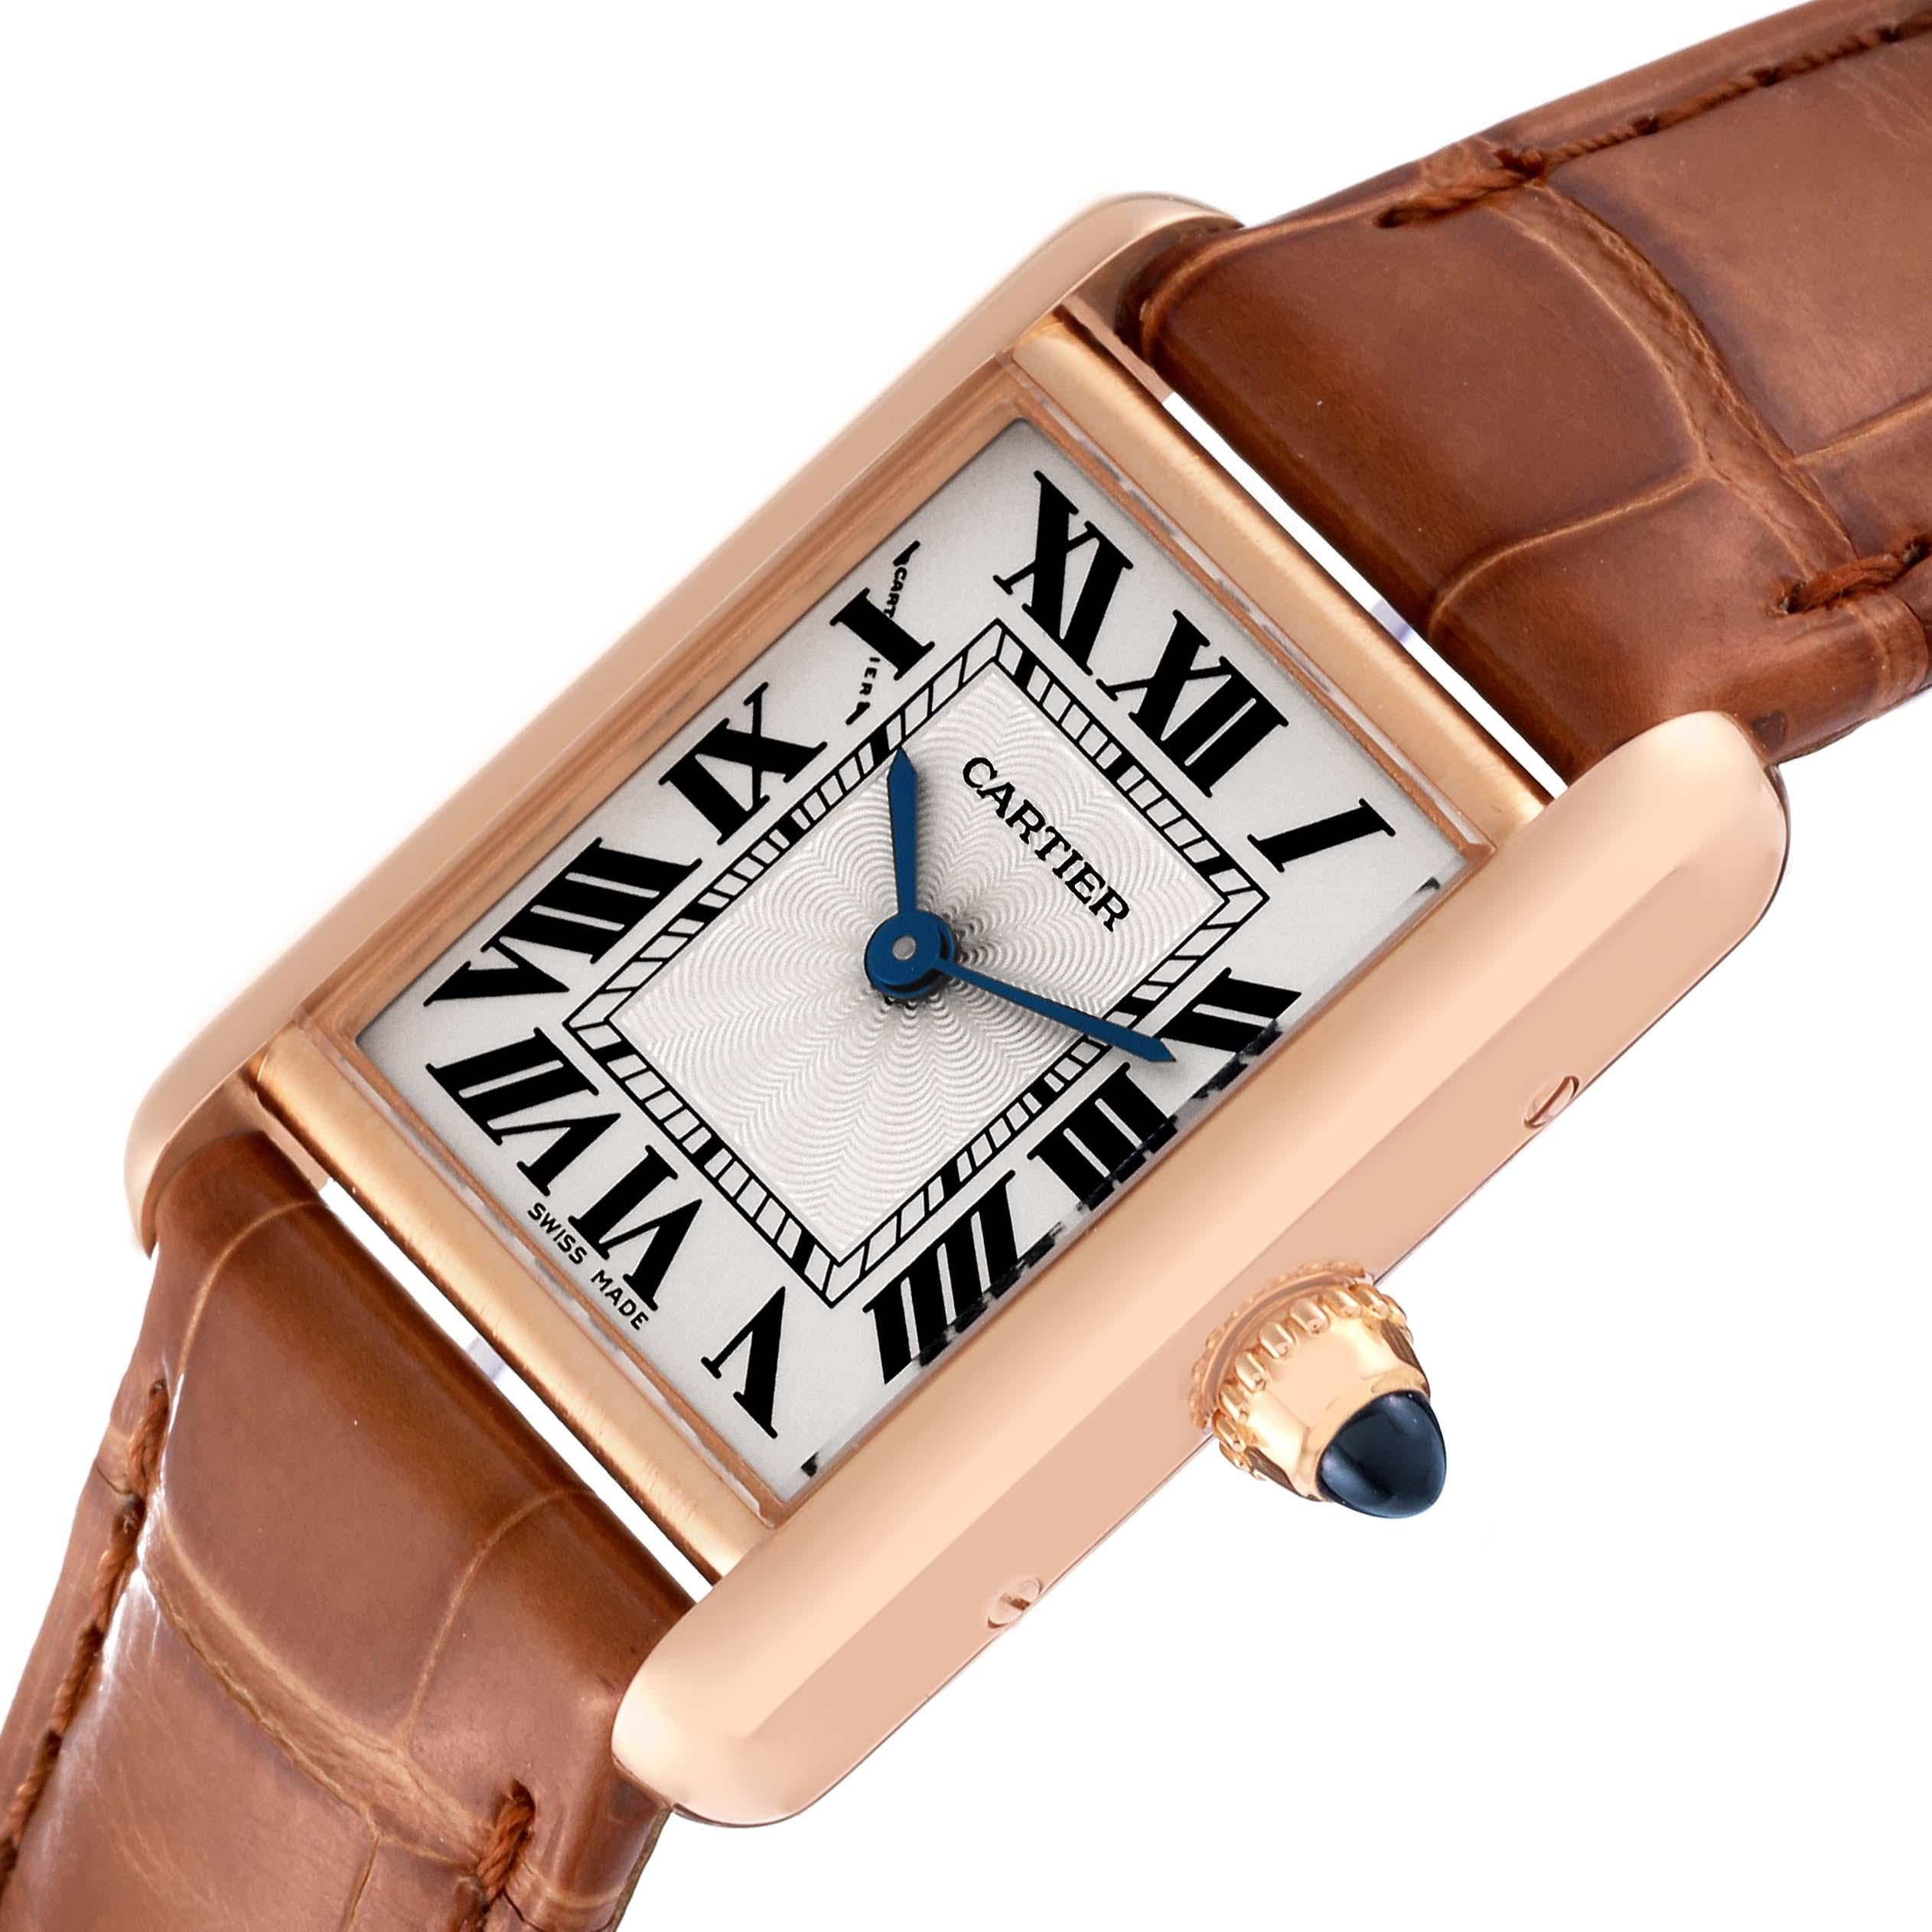 Cartier Tank Louis Rose Gold Mechanical Ladies Watch WGTA0010 Papers 1